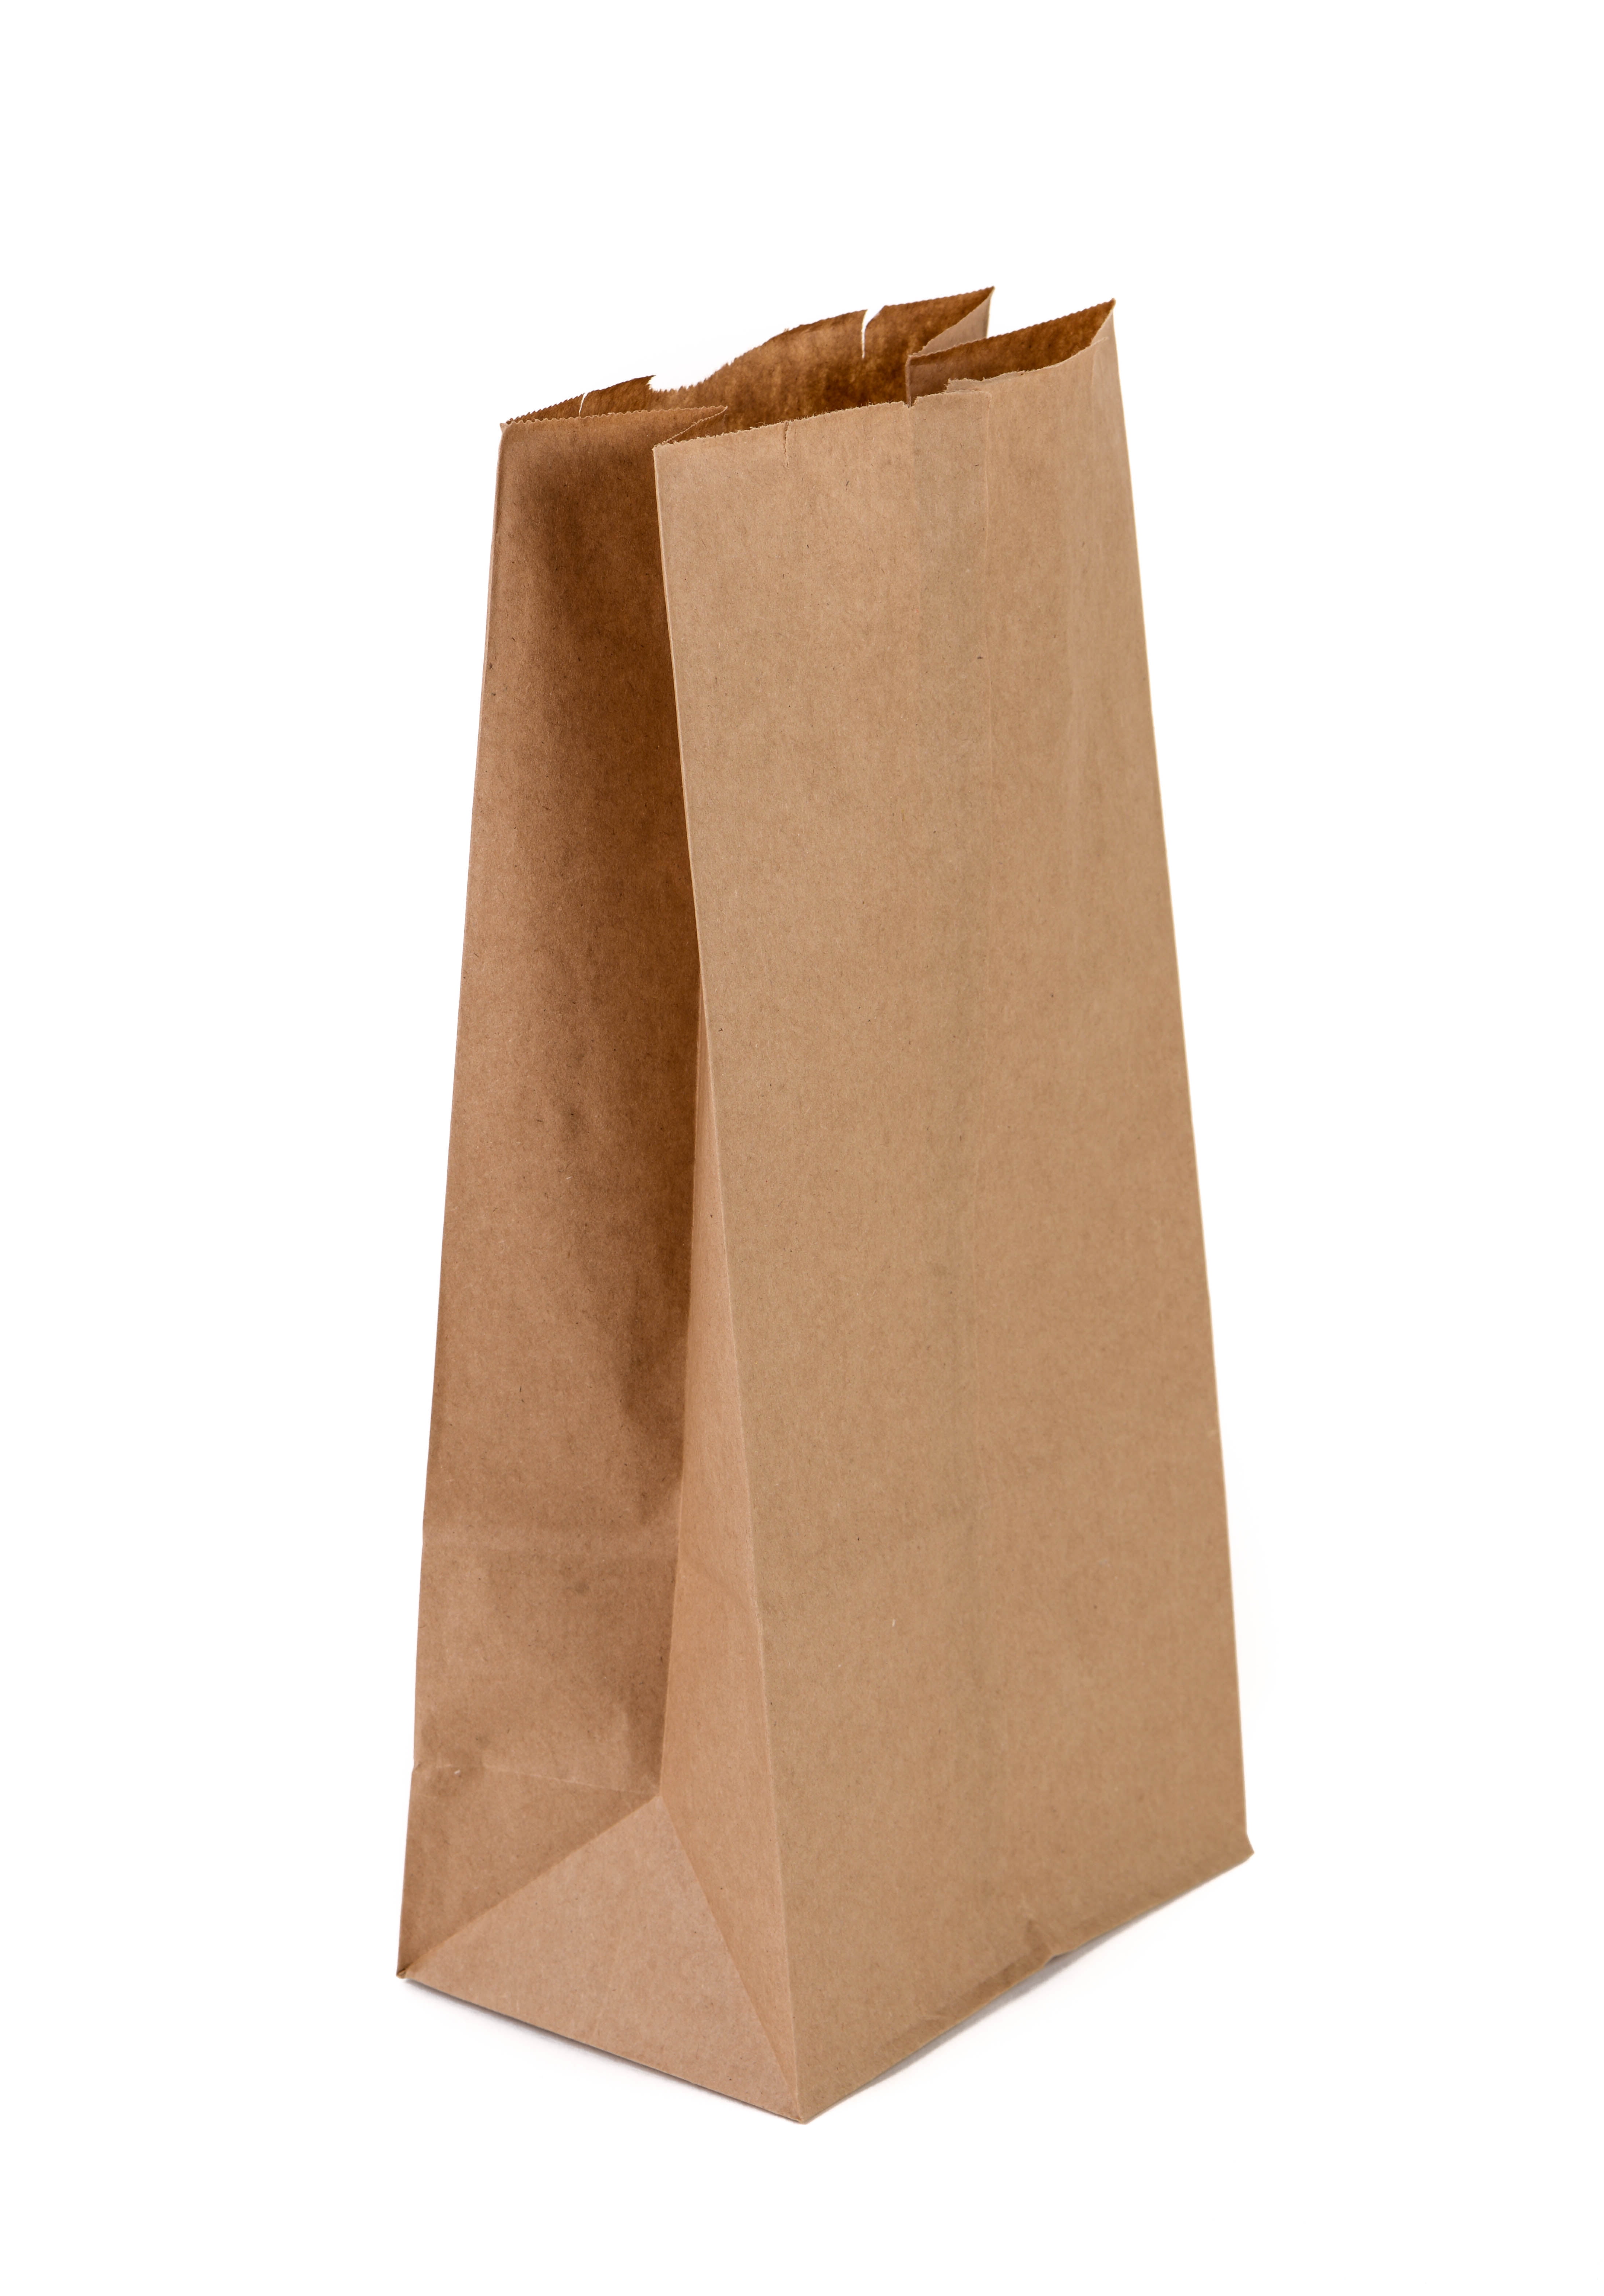 PAPER CARRIER BAGS WHITE SOS KRAFT TAKEAWAY FOOD LUNCH PARTY WITH HANDLES 